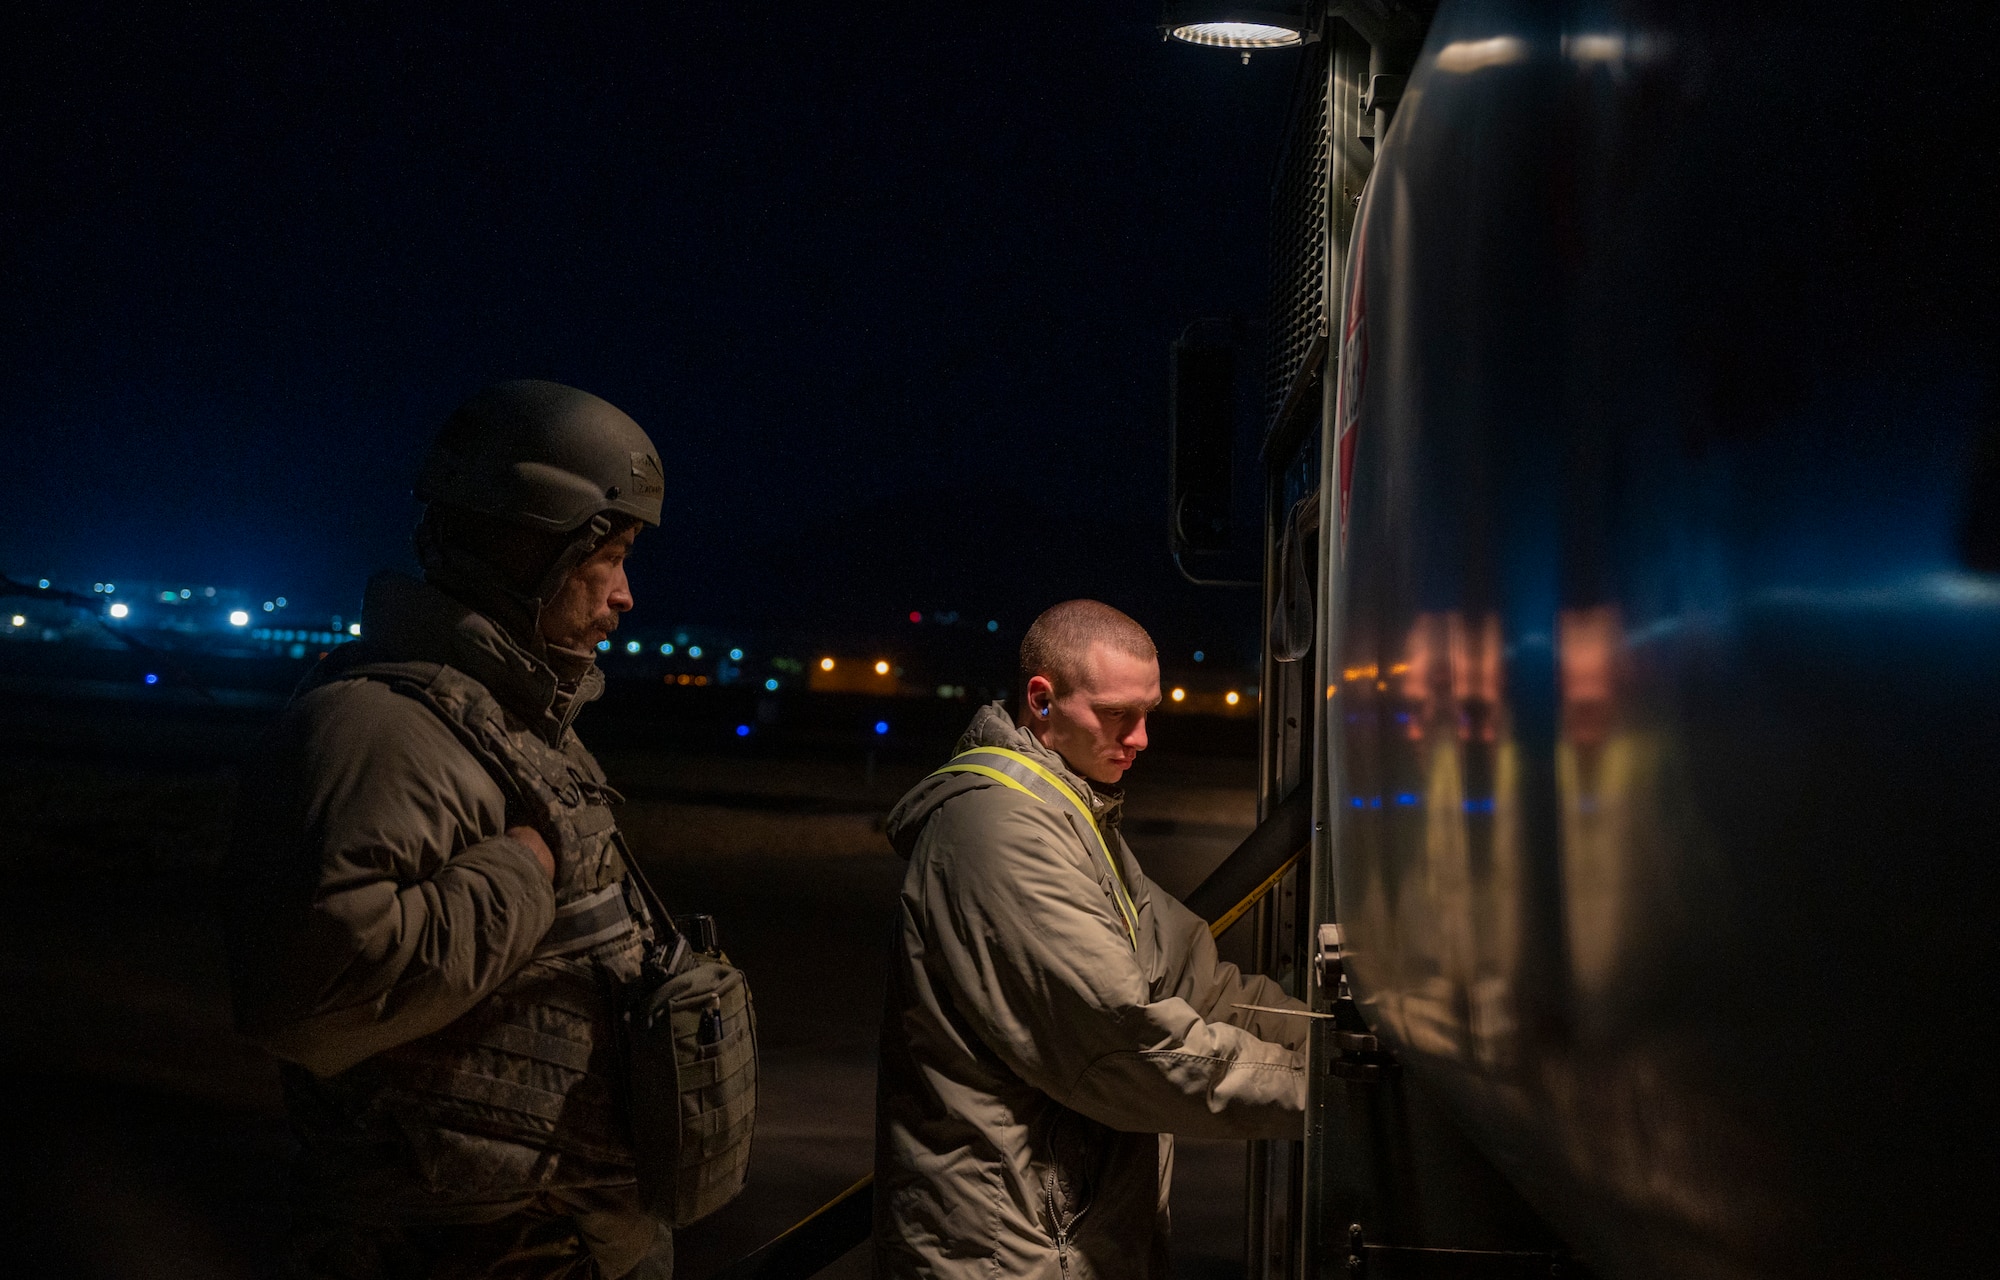 U.S. Air Force Staff Sgt. Zachary Smith, 51st Logistics Readiness Squadron (LRS) fuels distribution supervisor and Senior Airman Patrick Manley, 51st LRS fuels distribution operator check fuel pressure on an R-11 refueler truck during a training event at Daegu Air Base, Republic of Korea, Feb. 1, 2023.